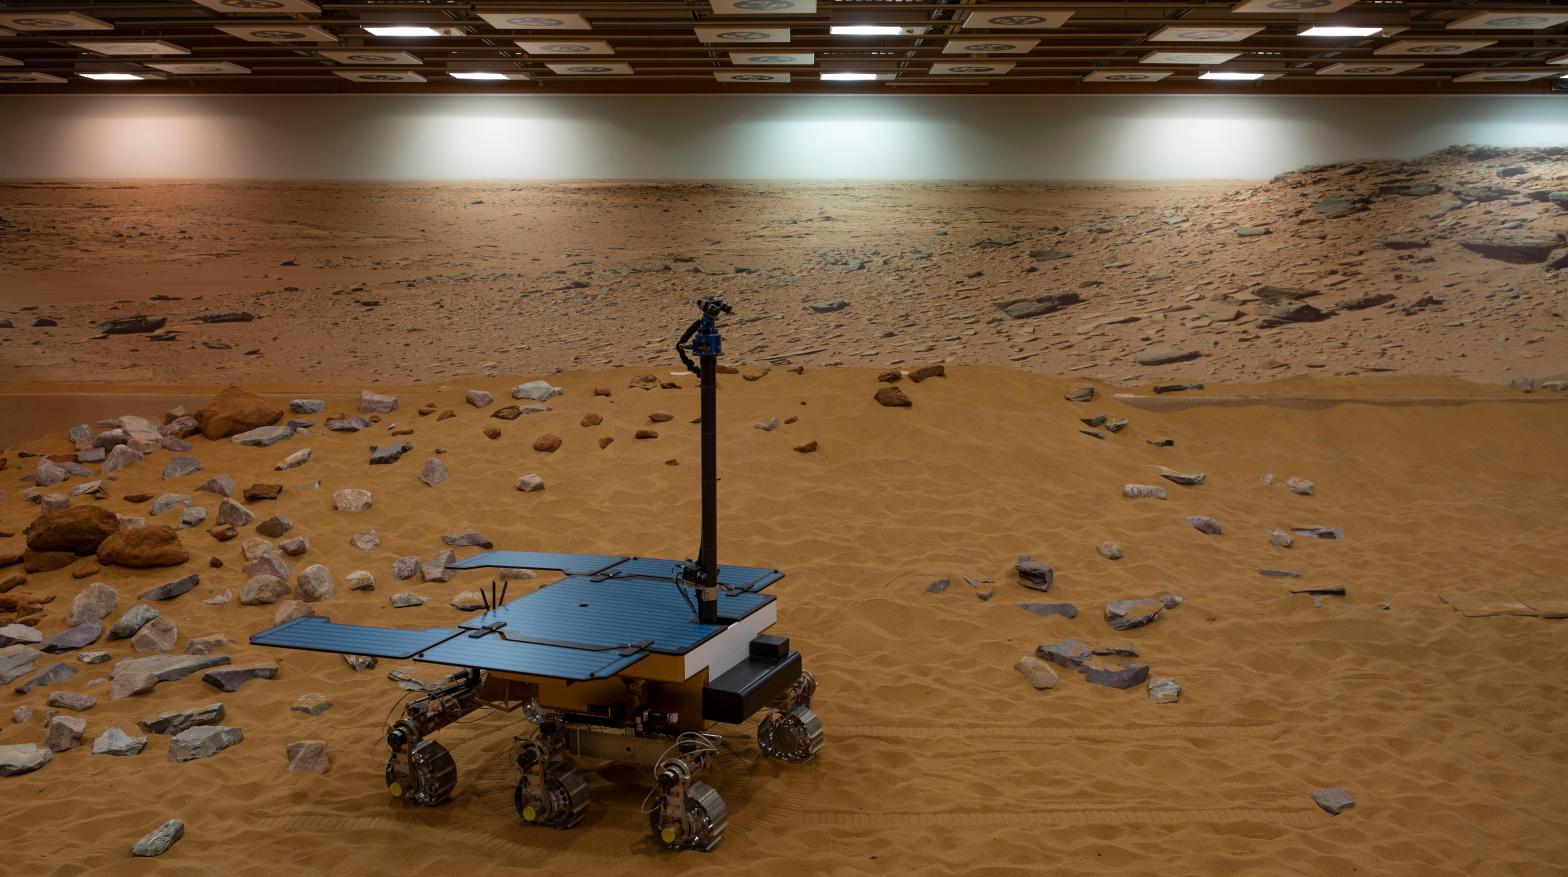 A working prototype of the ExoMars rover at the Airbus Defence Space facility on February 7, 2019 in Stevenage, England. (Photo: Dan Kitwood, Getty Images)